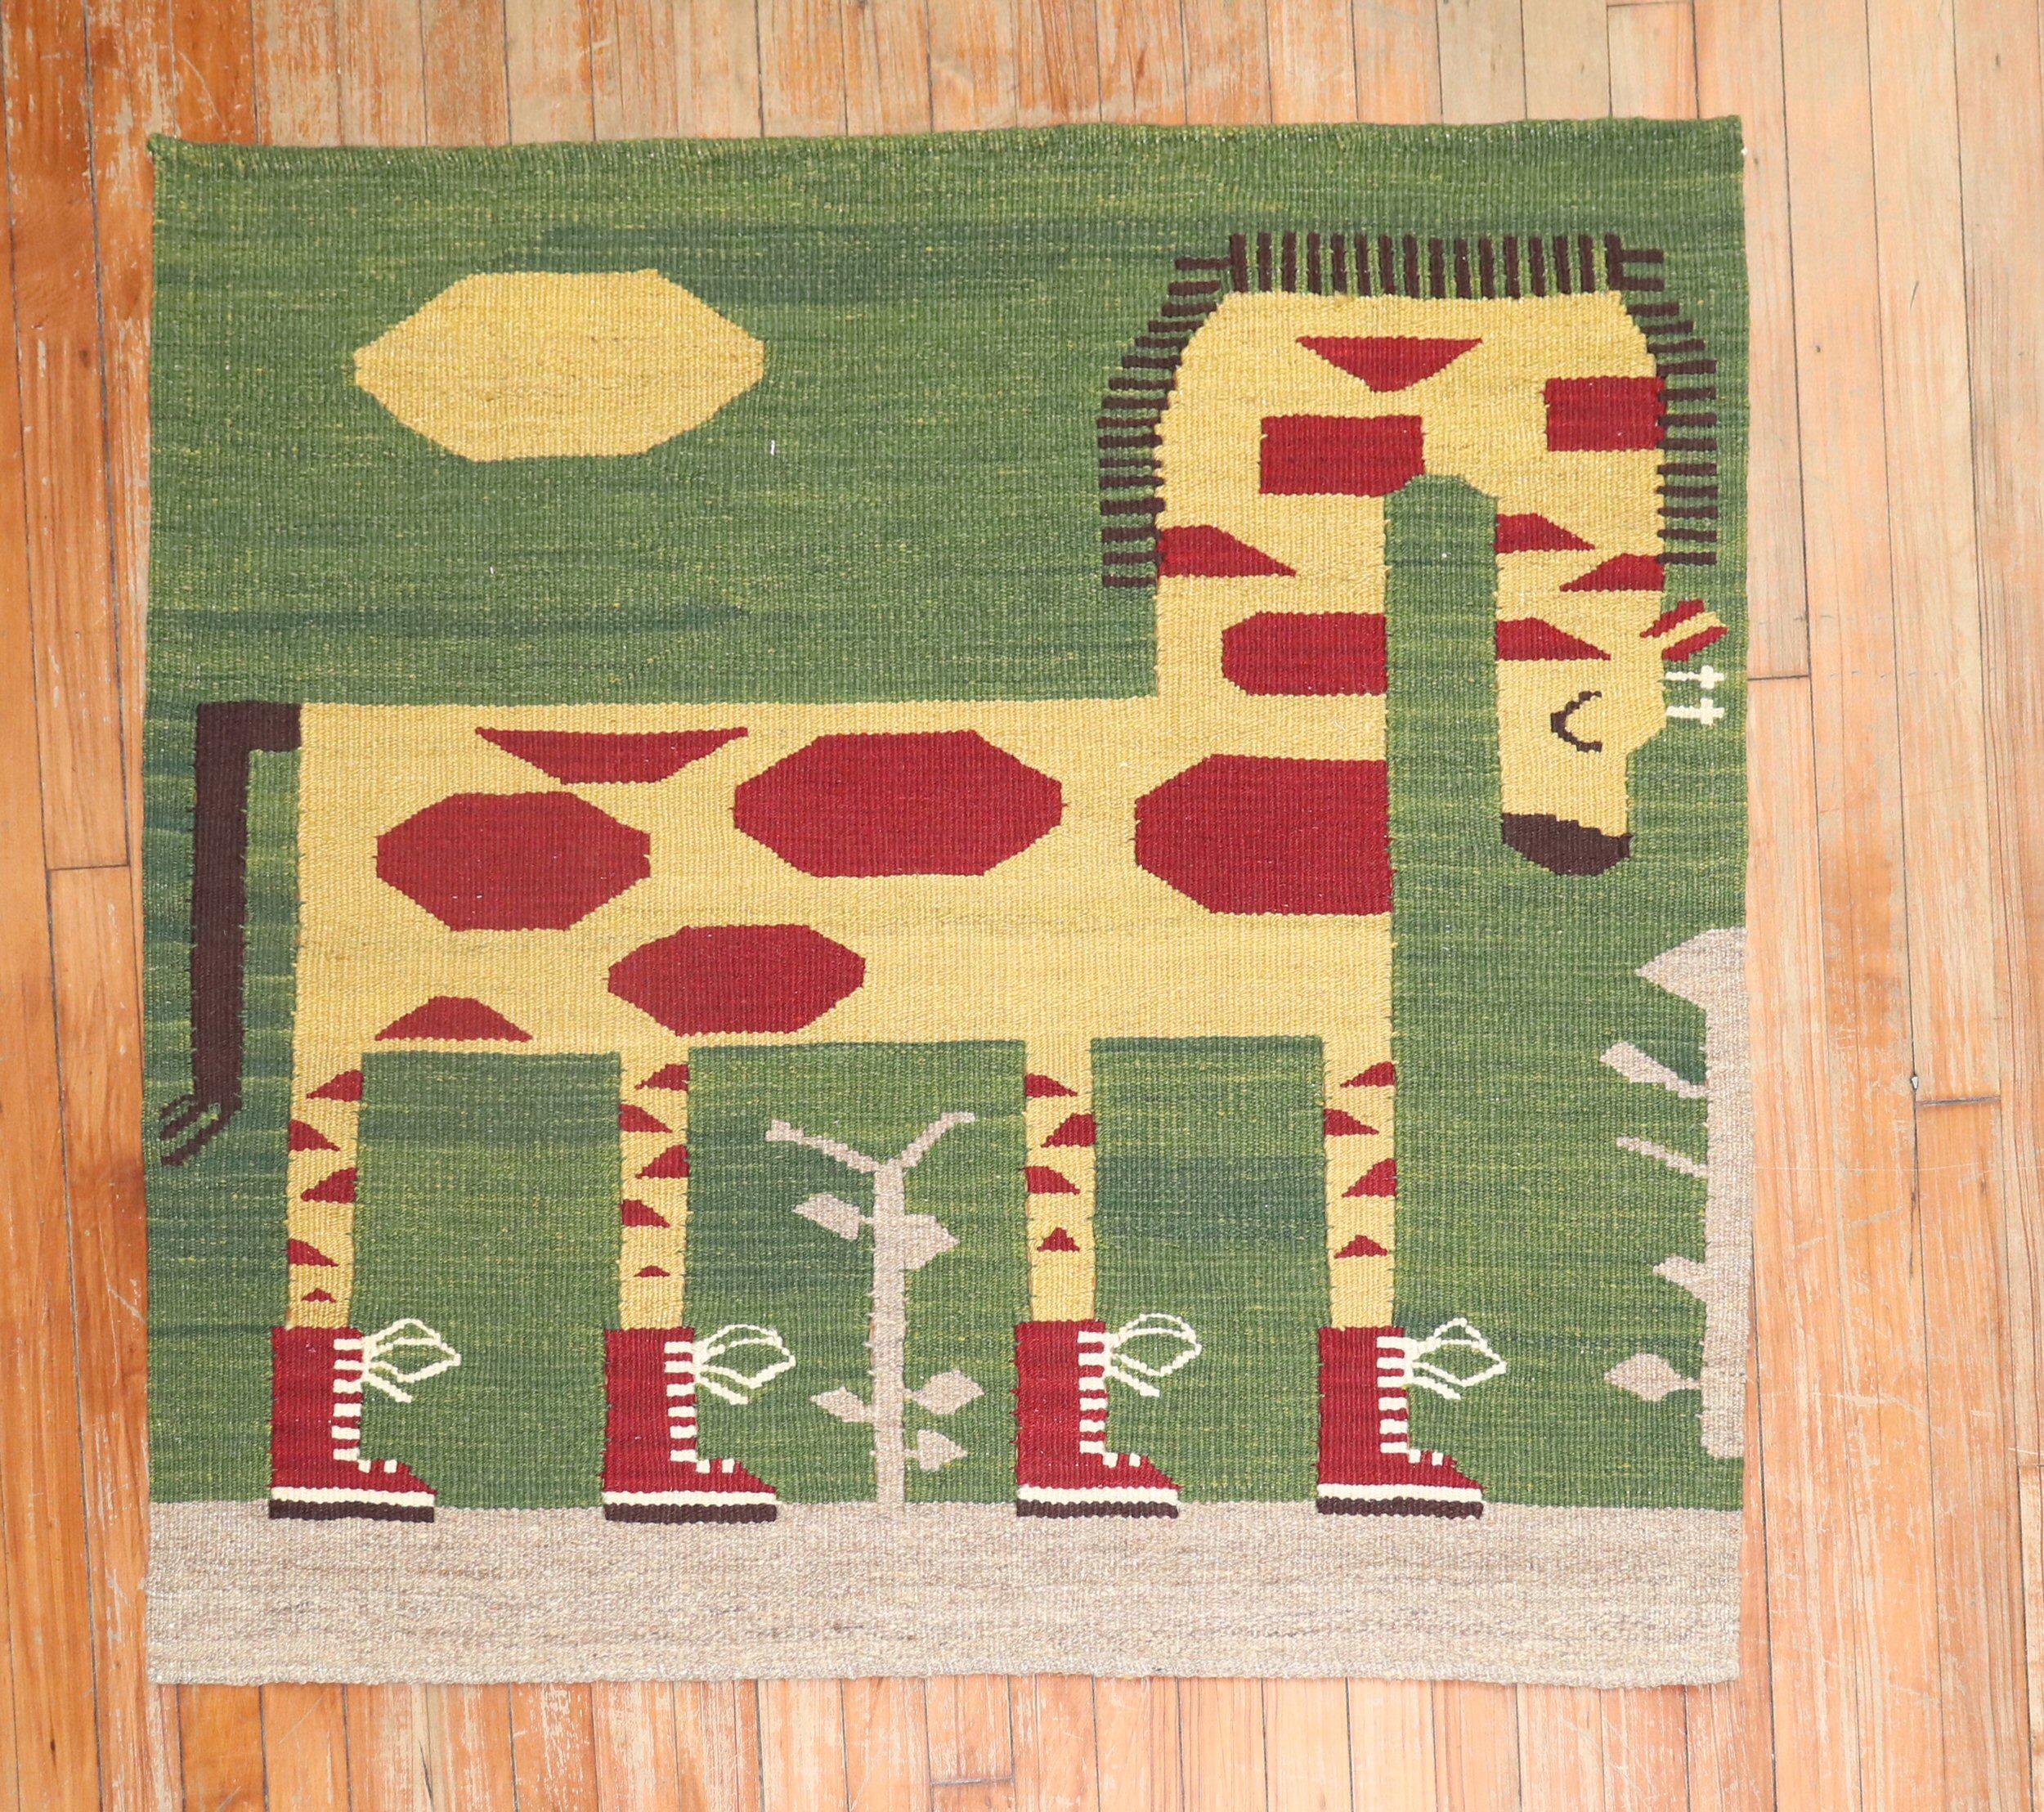 Scatter size Persian Kilim from the late 20th century with a sad giraffe on a green field. Look at those boots though!

This was originally belonging to a private Persian collector who requested to make a custom collection of flat-weaves with